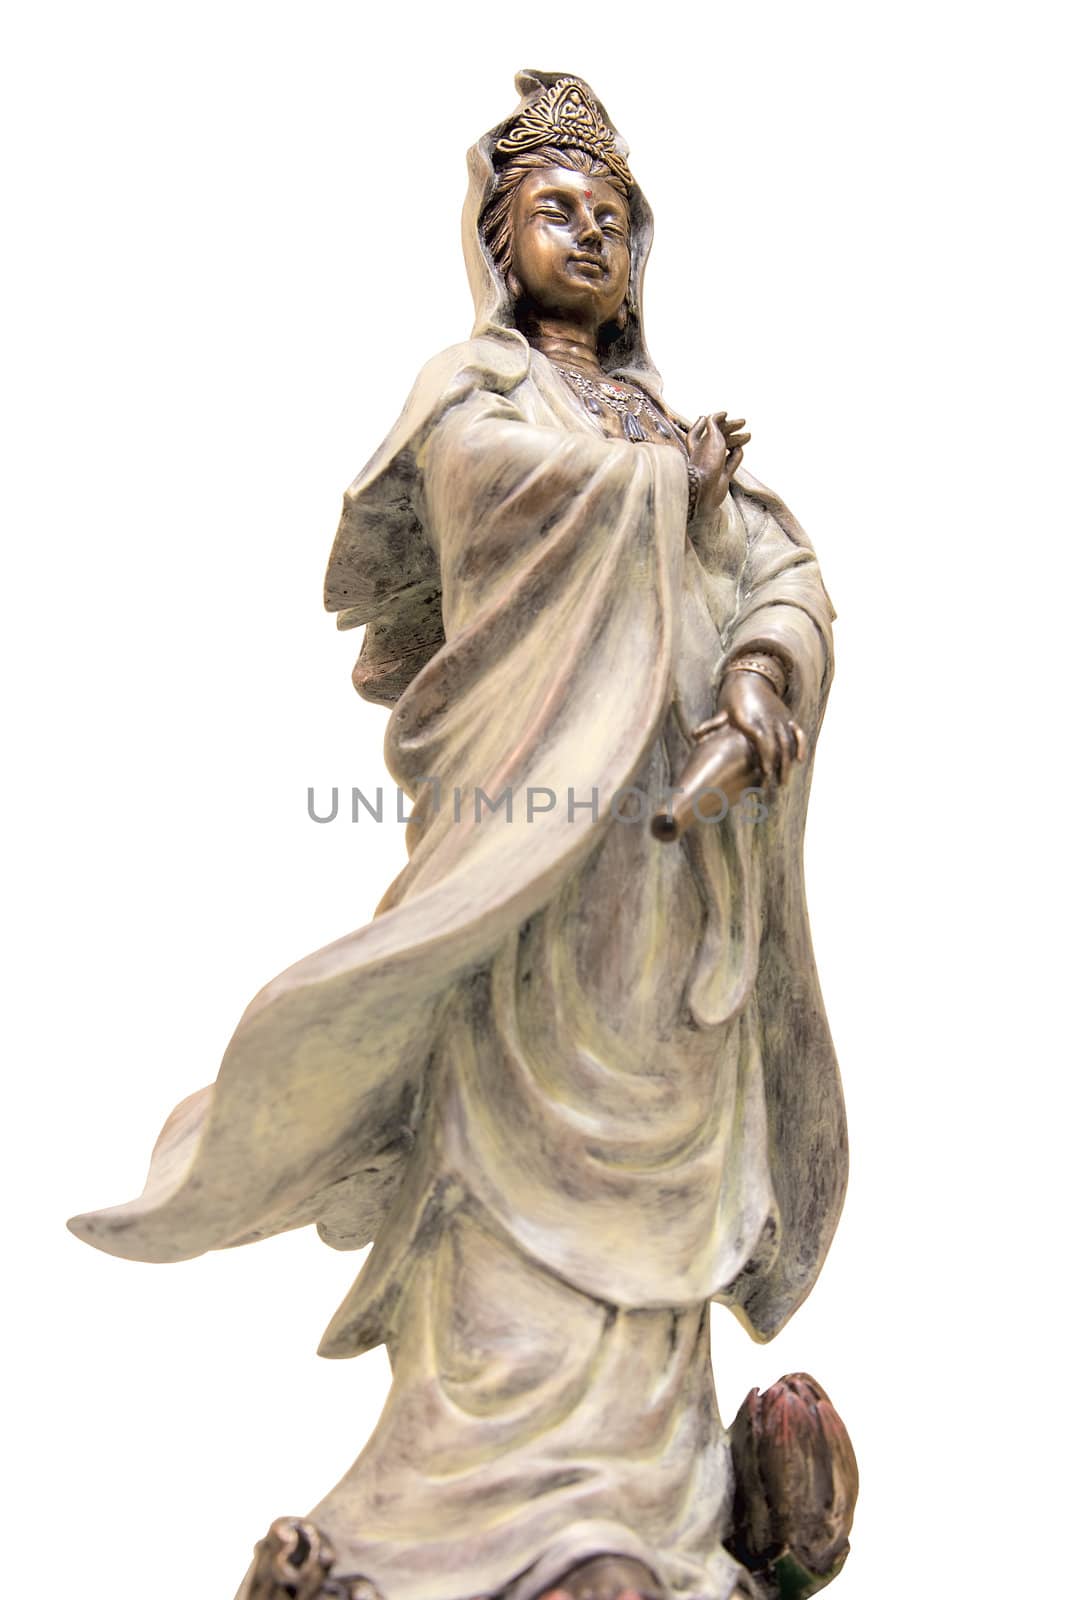 Kuan Yin Goddess of Compassion Bronze Statue Isolated on White Background